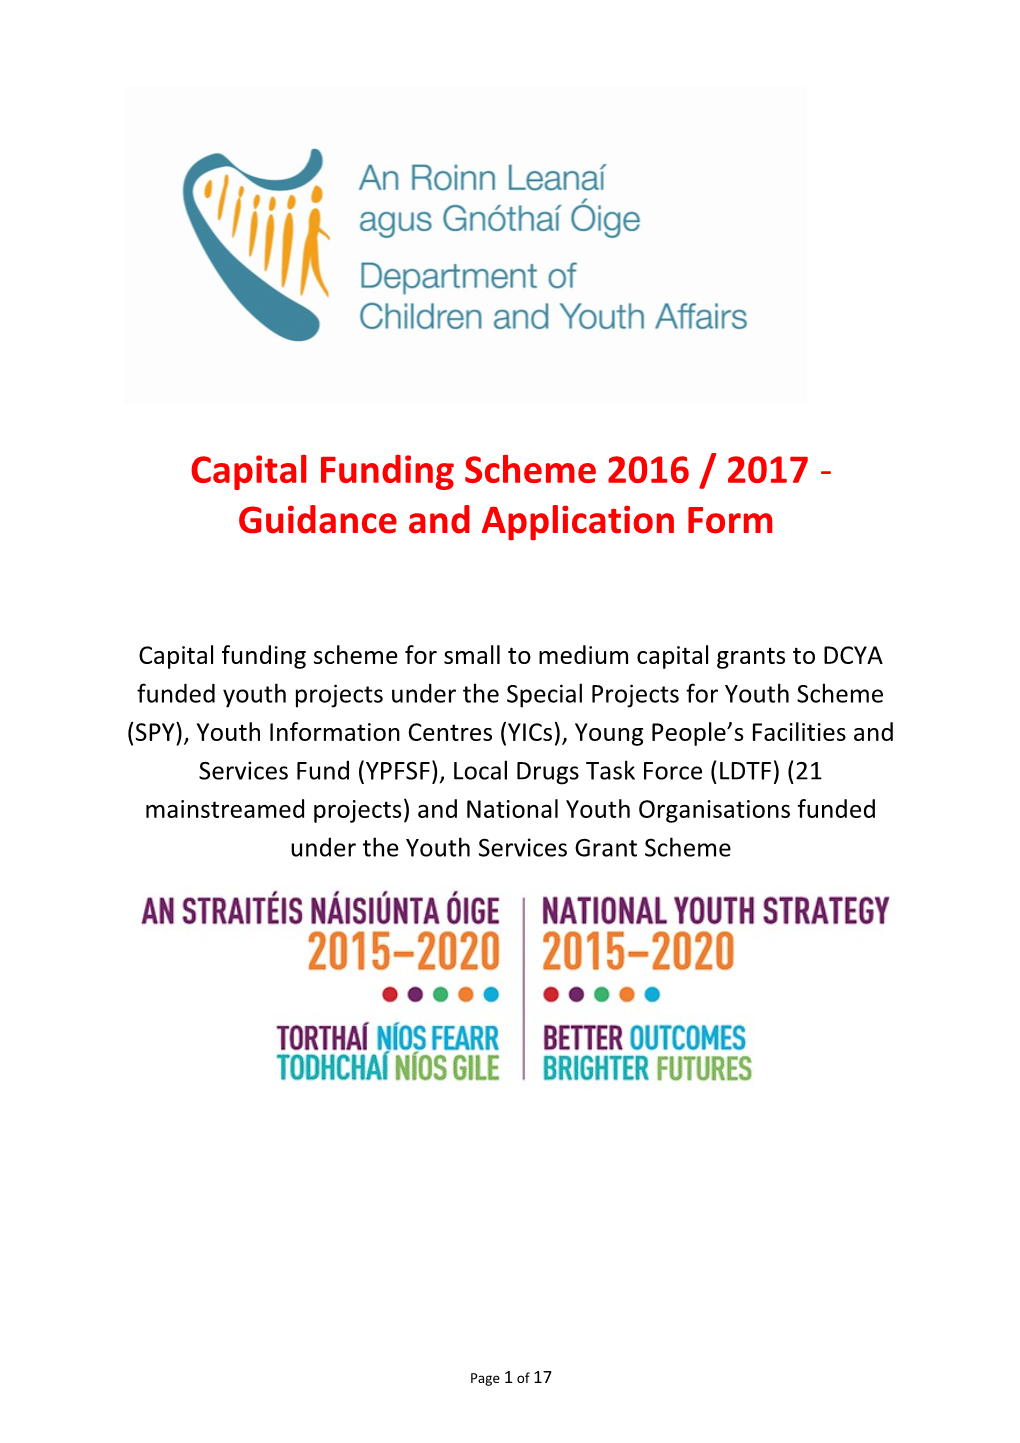 Capital Funding Scheme 2016 / 2017 - Guidance and Application Form